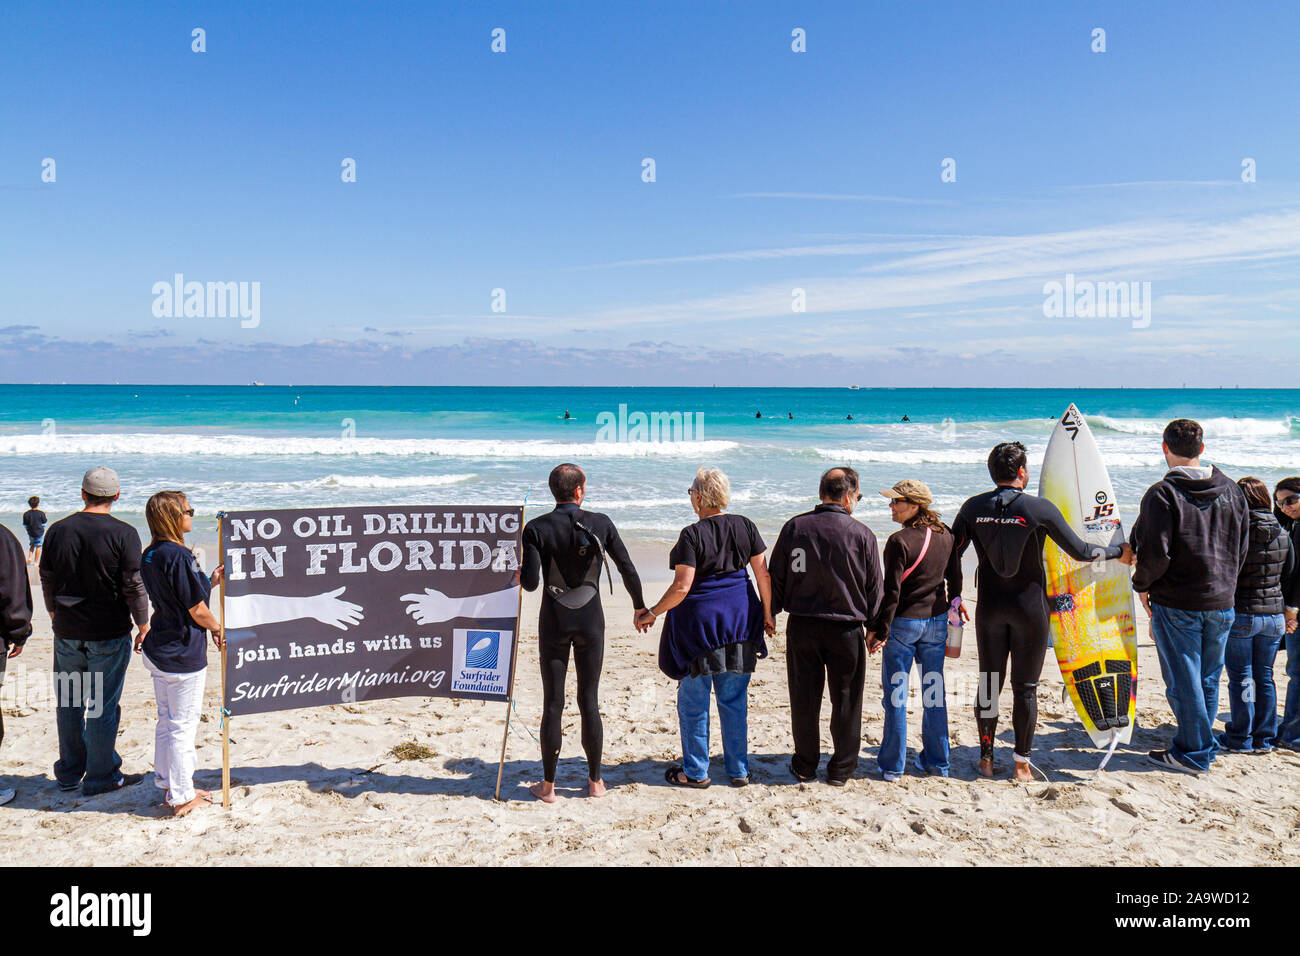 Miami Beach Florida,Surfrider Foundation,No Offshore Florida Oil Drilling Protest,Black clothing represents oil,sign,hold hand,hands,Atlantic Ocean,wa Stock Photo